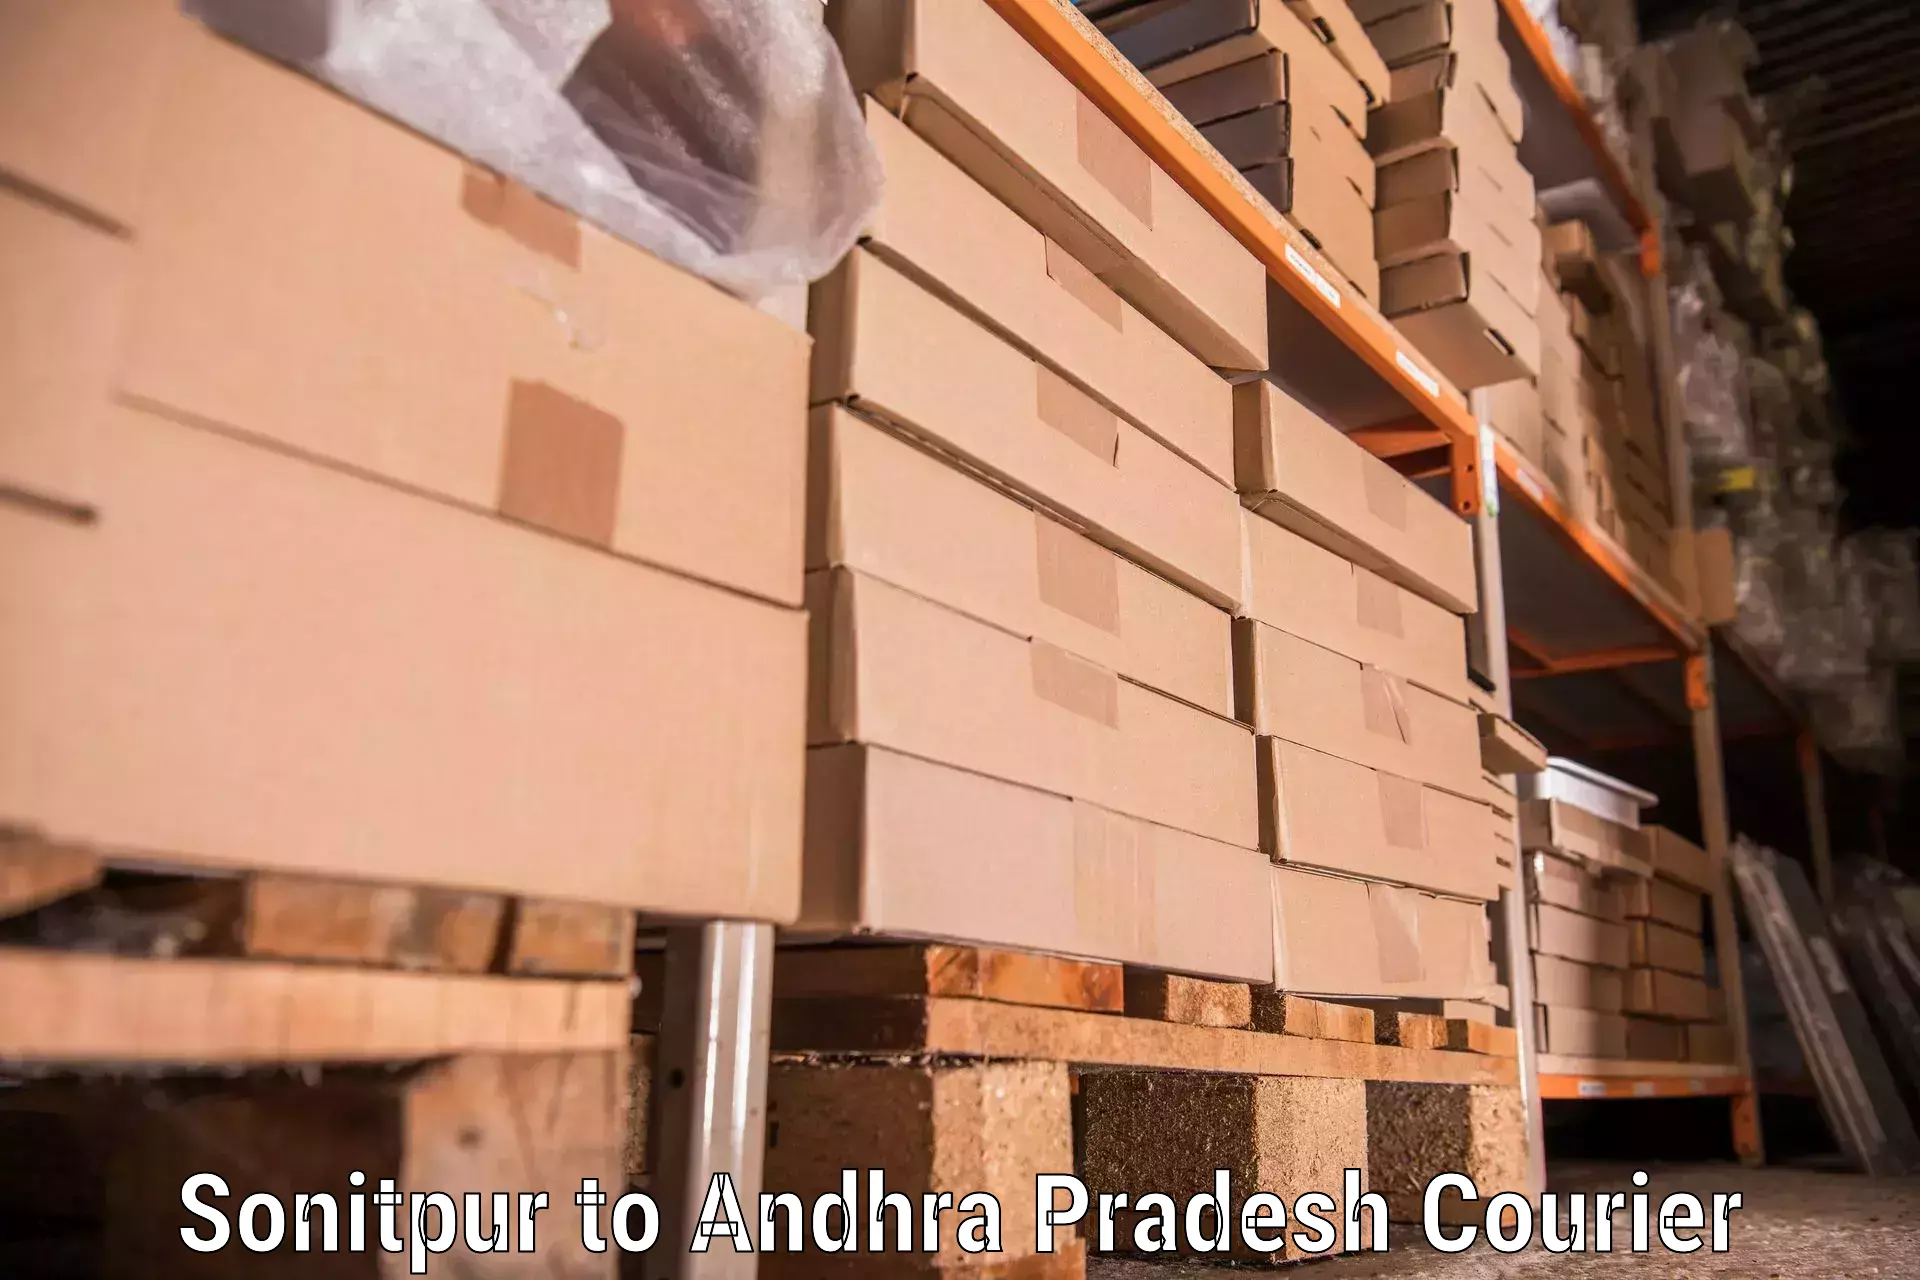 Quality moving services in Sonitpur to Ranastalam